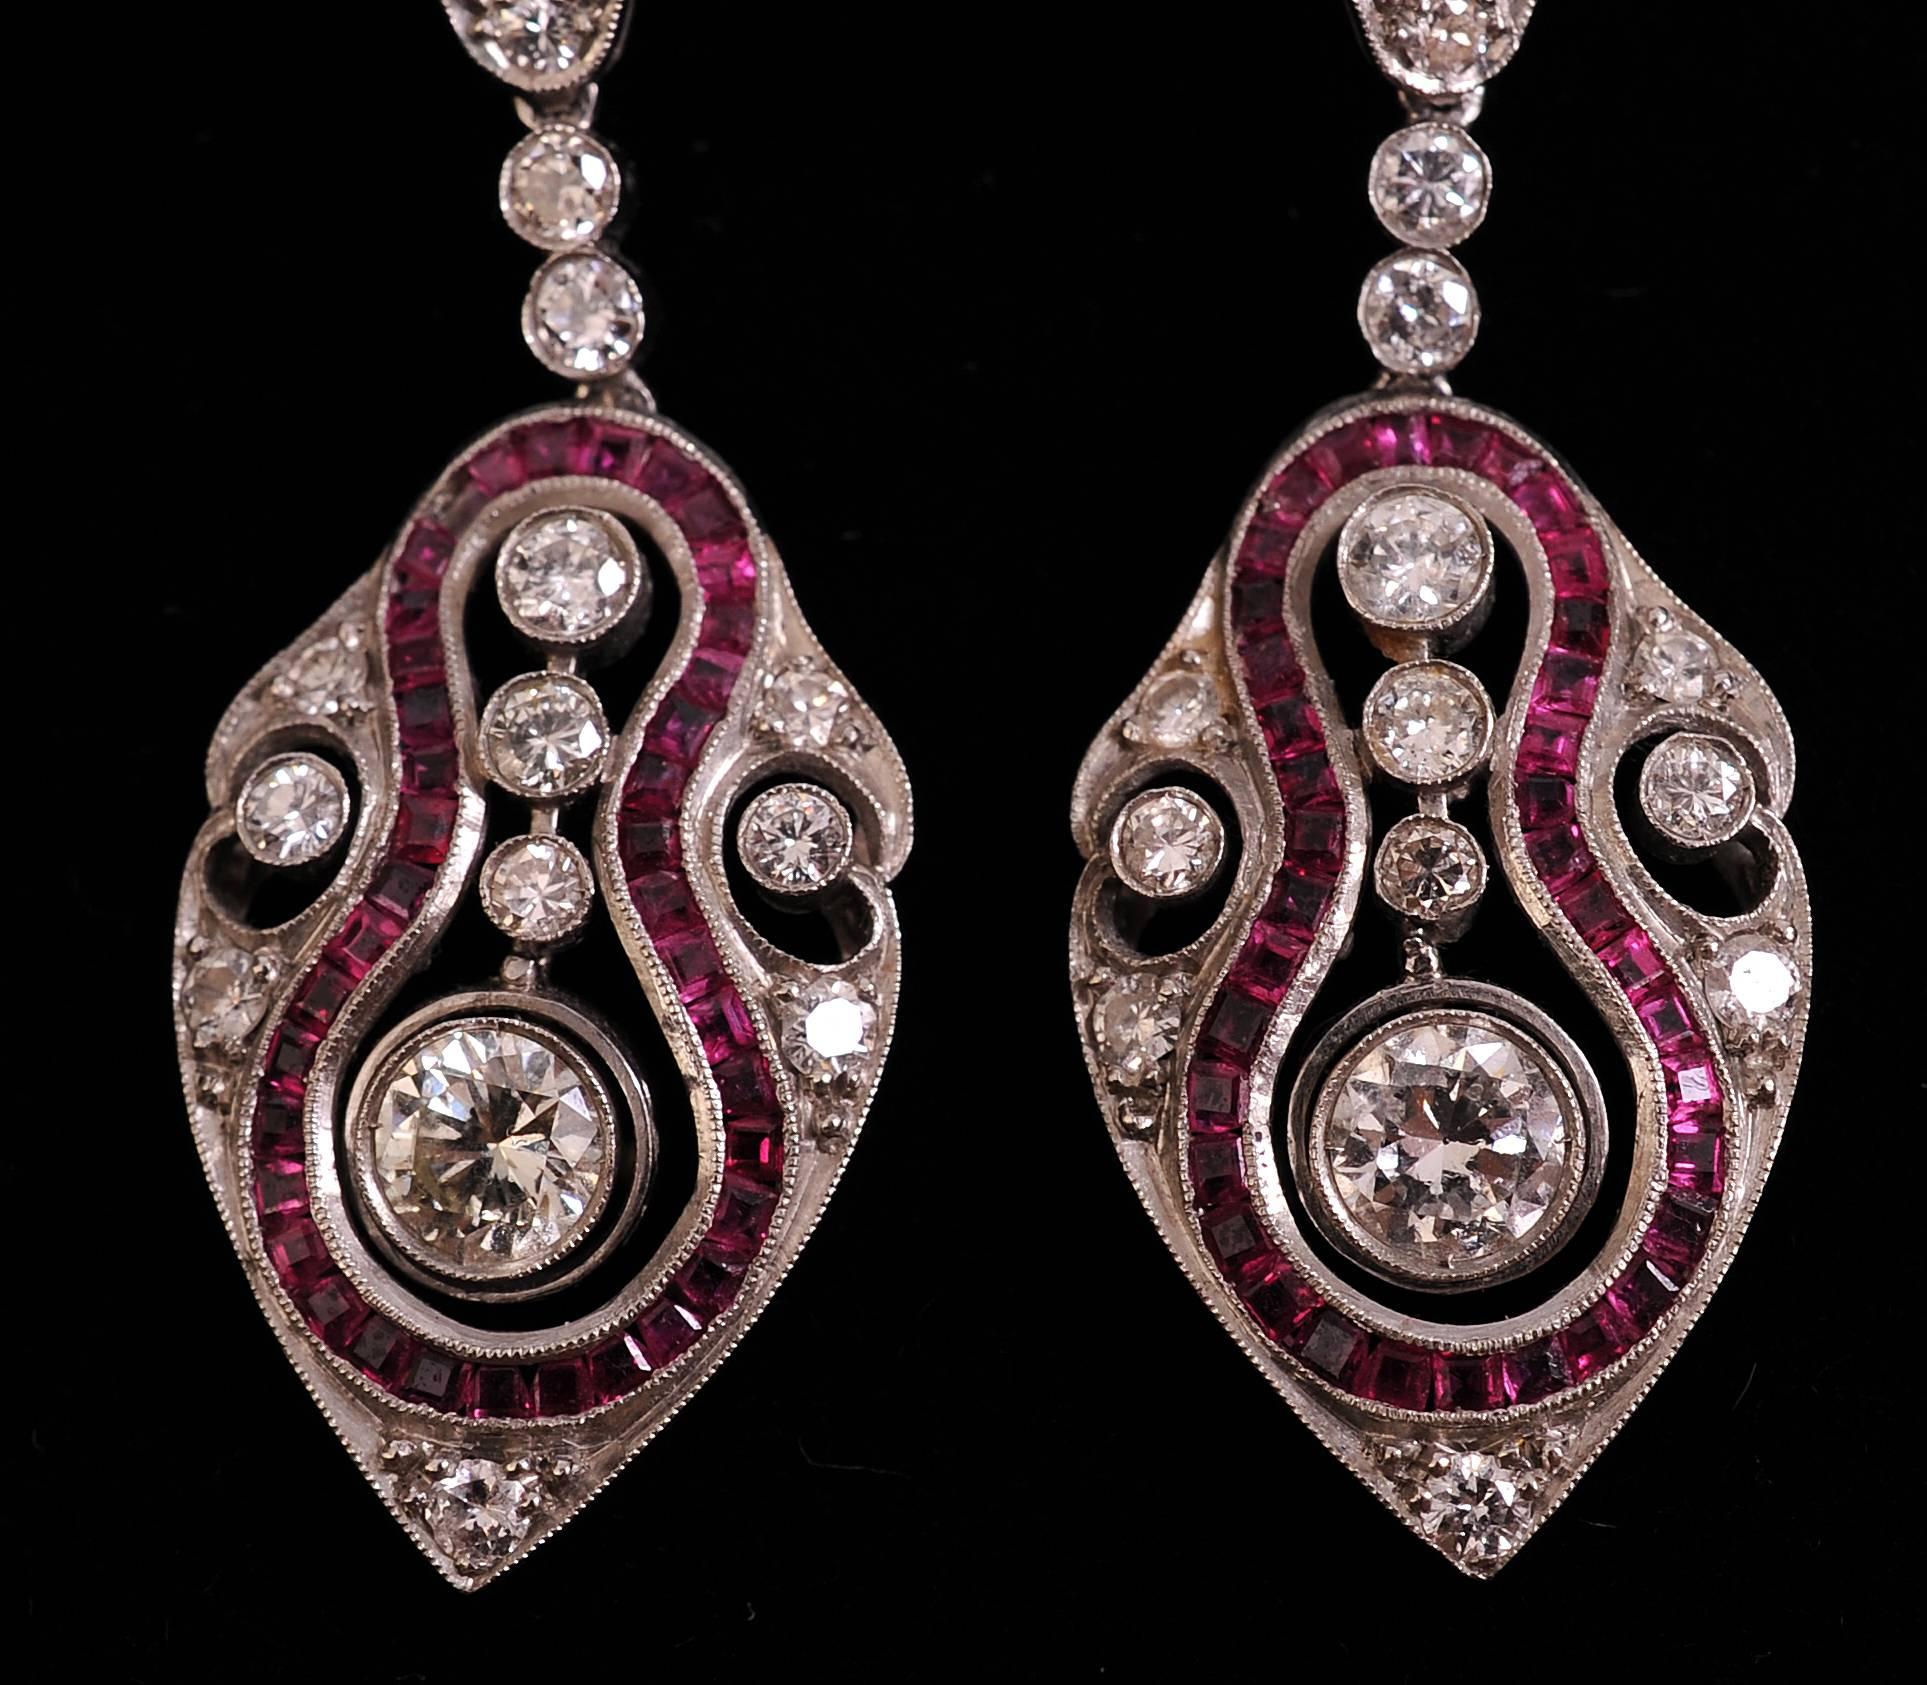 This is a stunning pair of Art Deco diamond, ruby and platinum earrings with the central .50 carat diamonds en tremblant. The earrings are composed of old European cut diamonds and baguette cut rubies and they suspended from gold wires. They are in